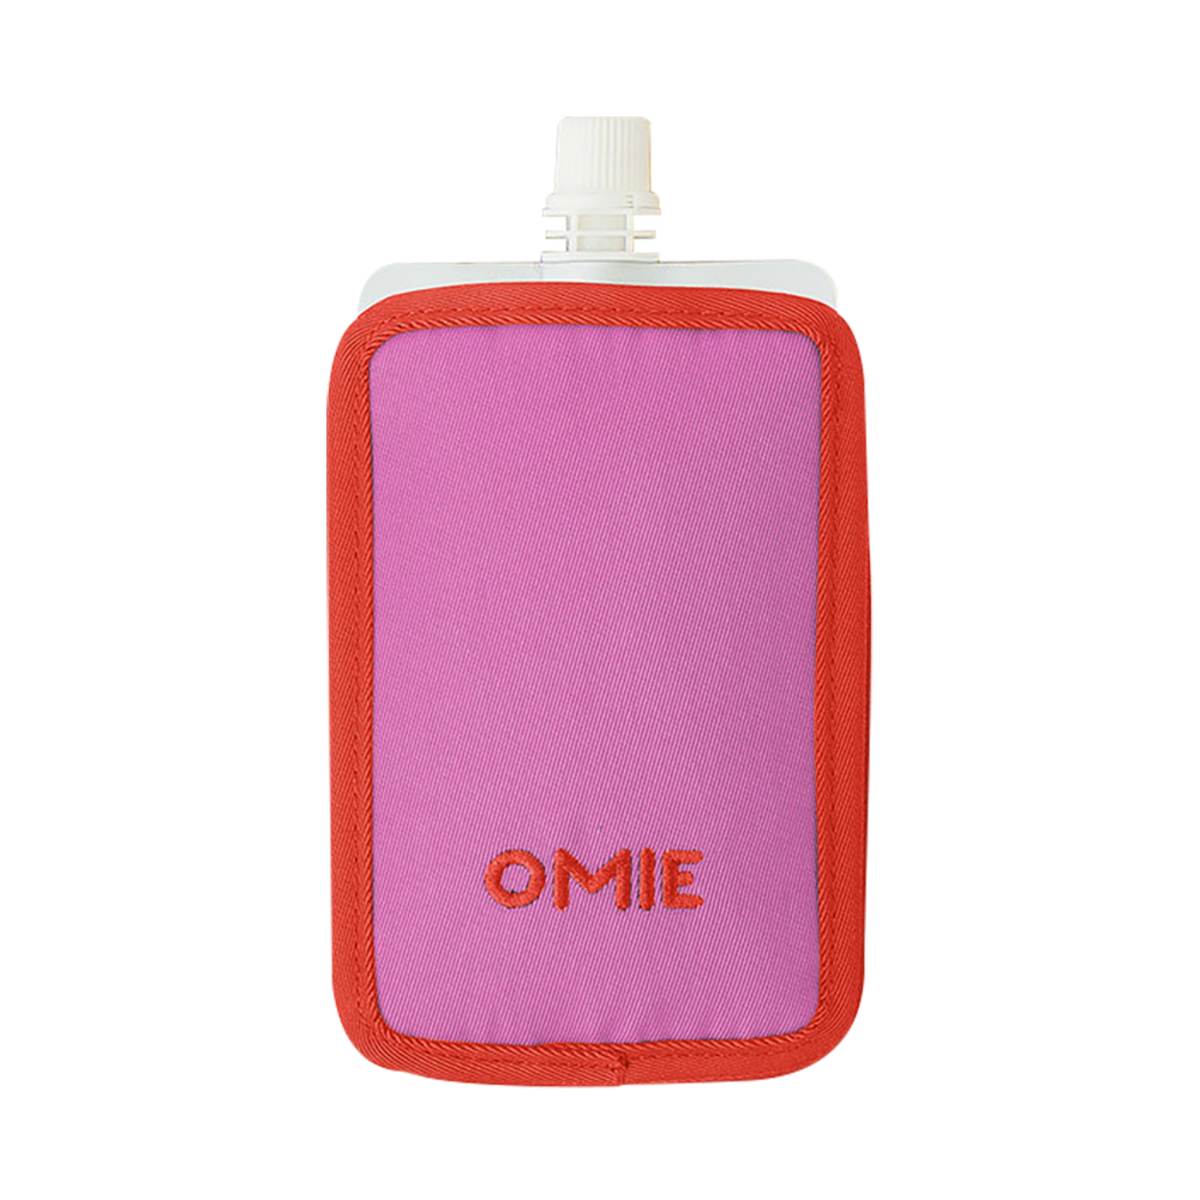 Omie Chill Freezable Yoghurt/Food Pouch